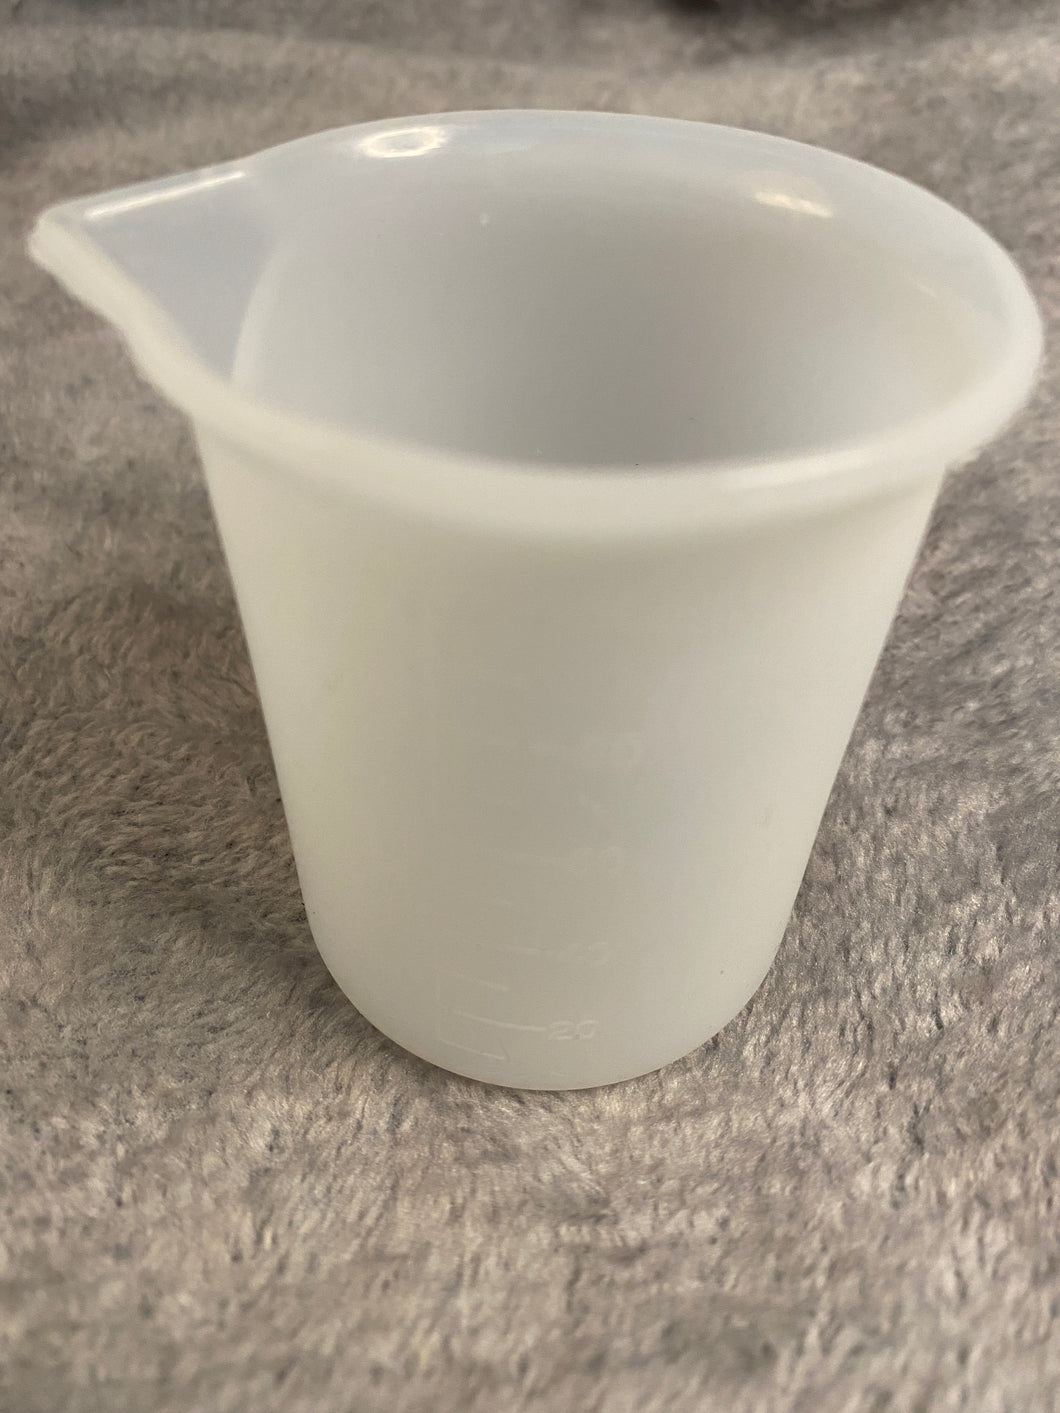 100 ml measuring cup, silicone cups, measuring cup, epoxy mixing cup, craft blanks, crafting blank, Niagara Falls Ontario Canada, tumbler makers Epoxy tumbler makers